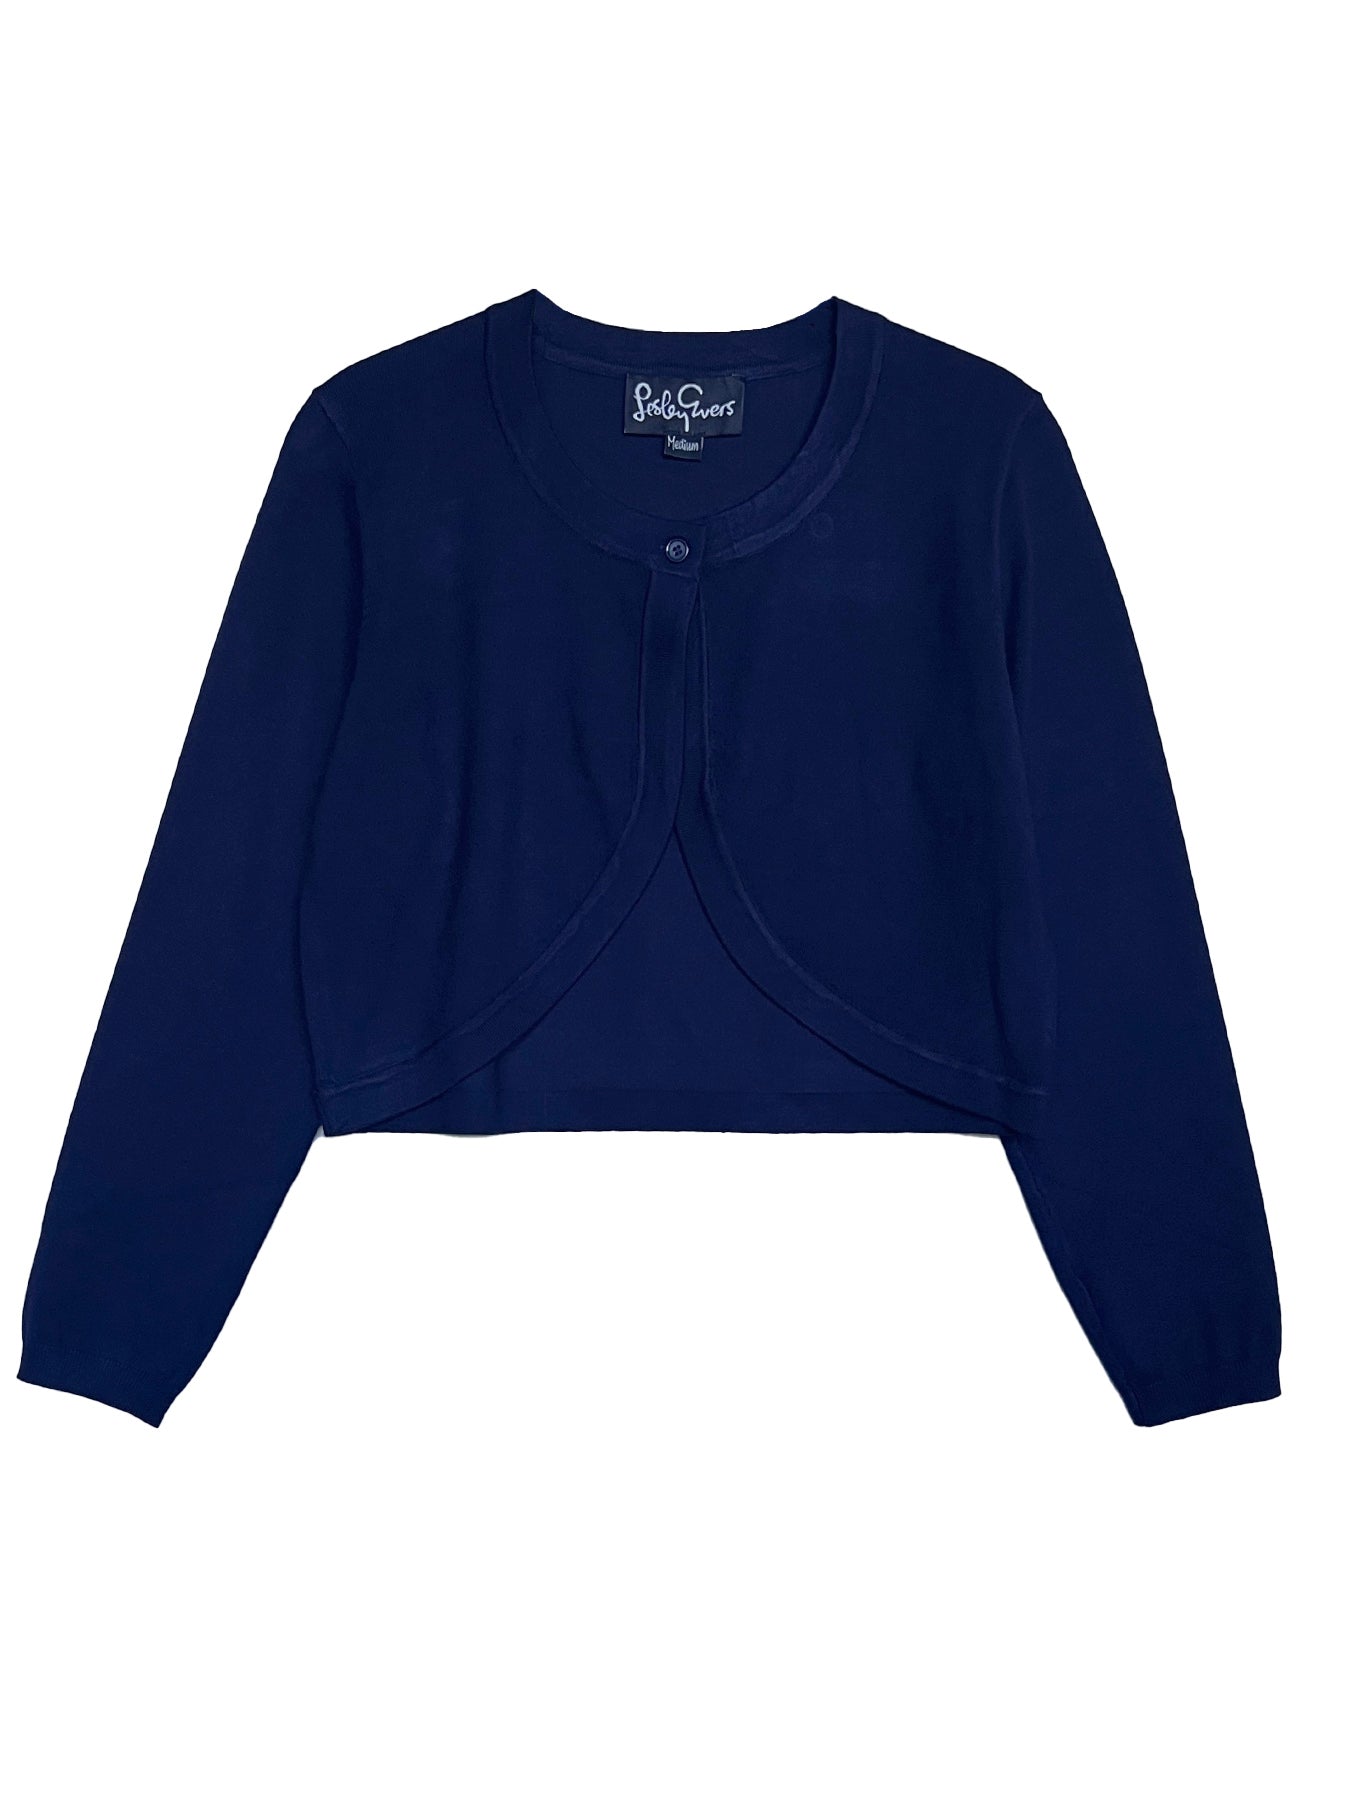 FINLEY shrug Navy - Lesley Evers-Jacket-Shop-Shop/All Products